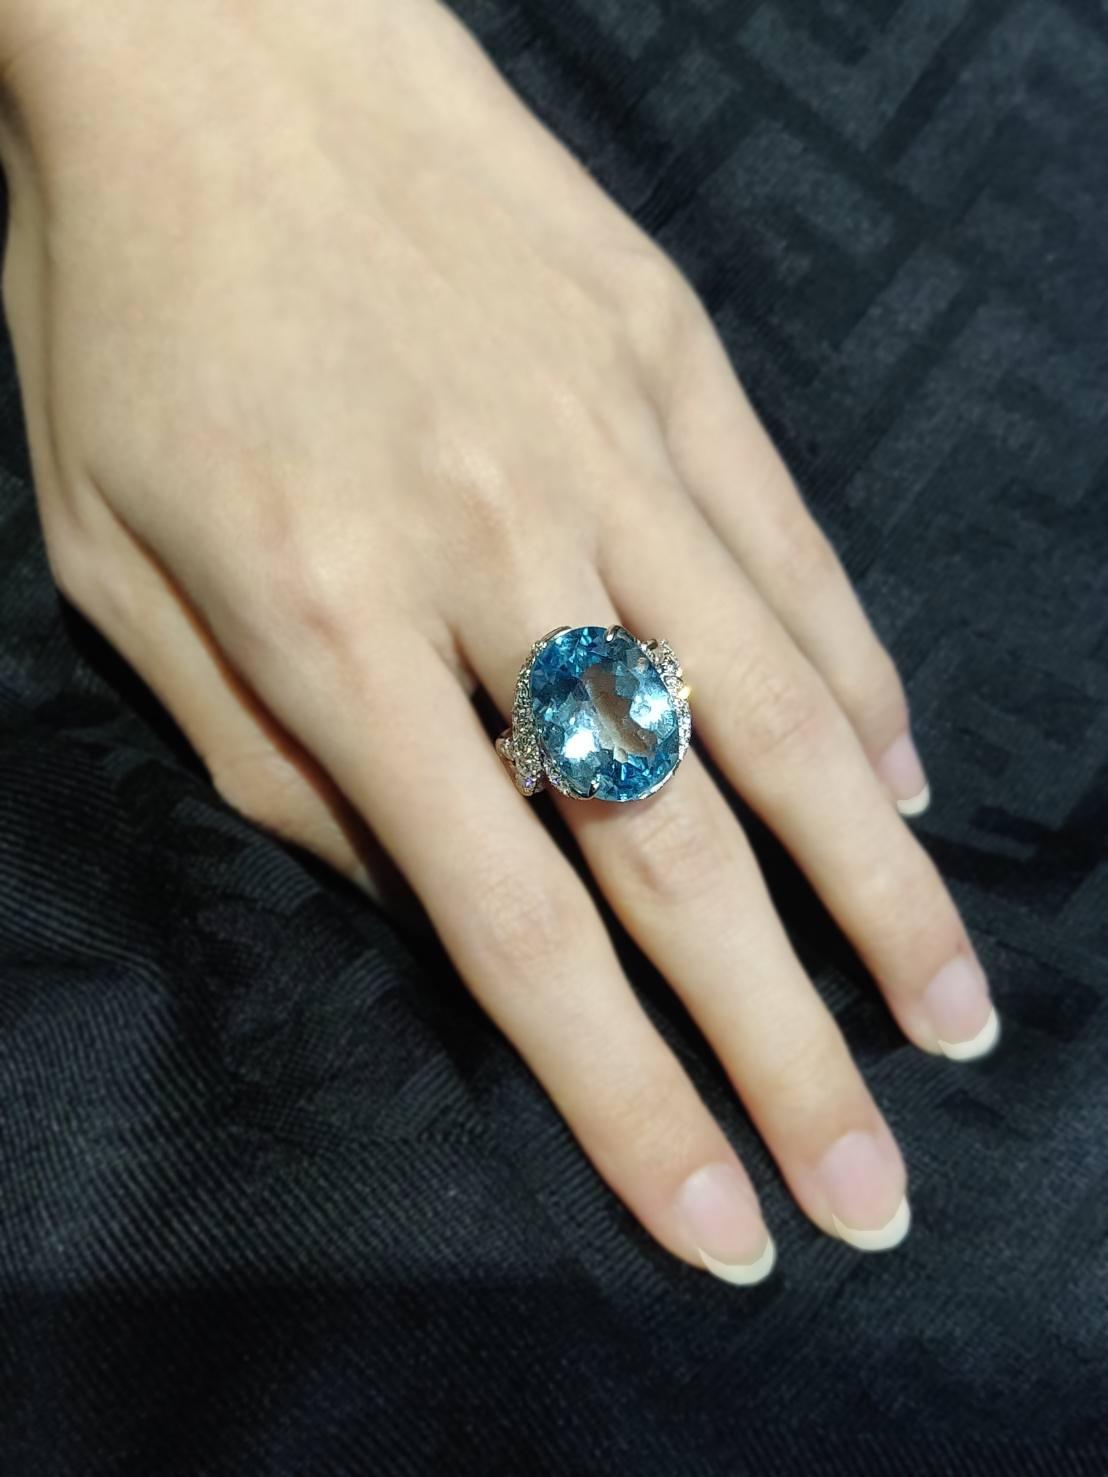 Blue Topaz Ring with Pavé Diamonds in 18K White Gold

Please let us know should you wish to have the ring resized.

Ring Size: US 6.75 / 54

Gold: 18K White Gold, 11.379 g
Blue Topaz: Oval, 19.94 ct
Diamond: 1.08 ct